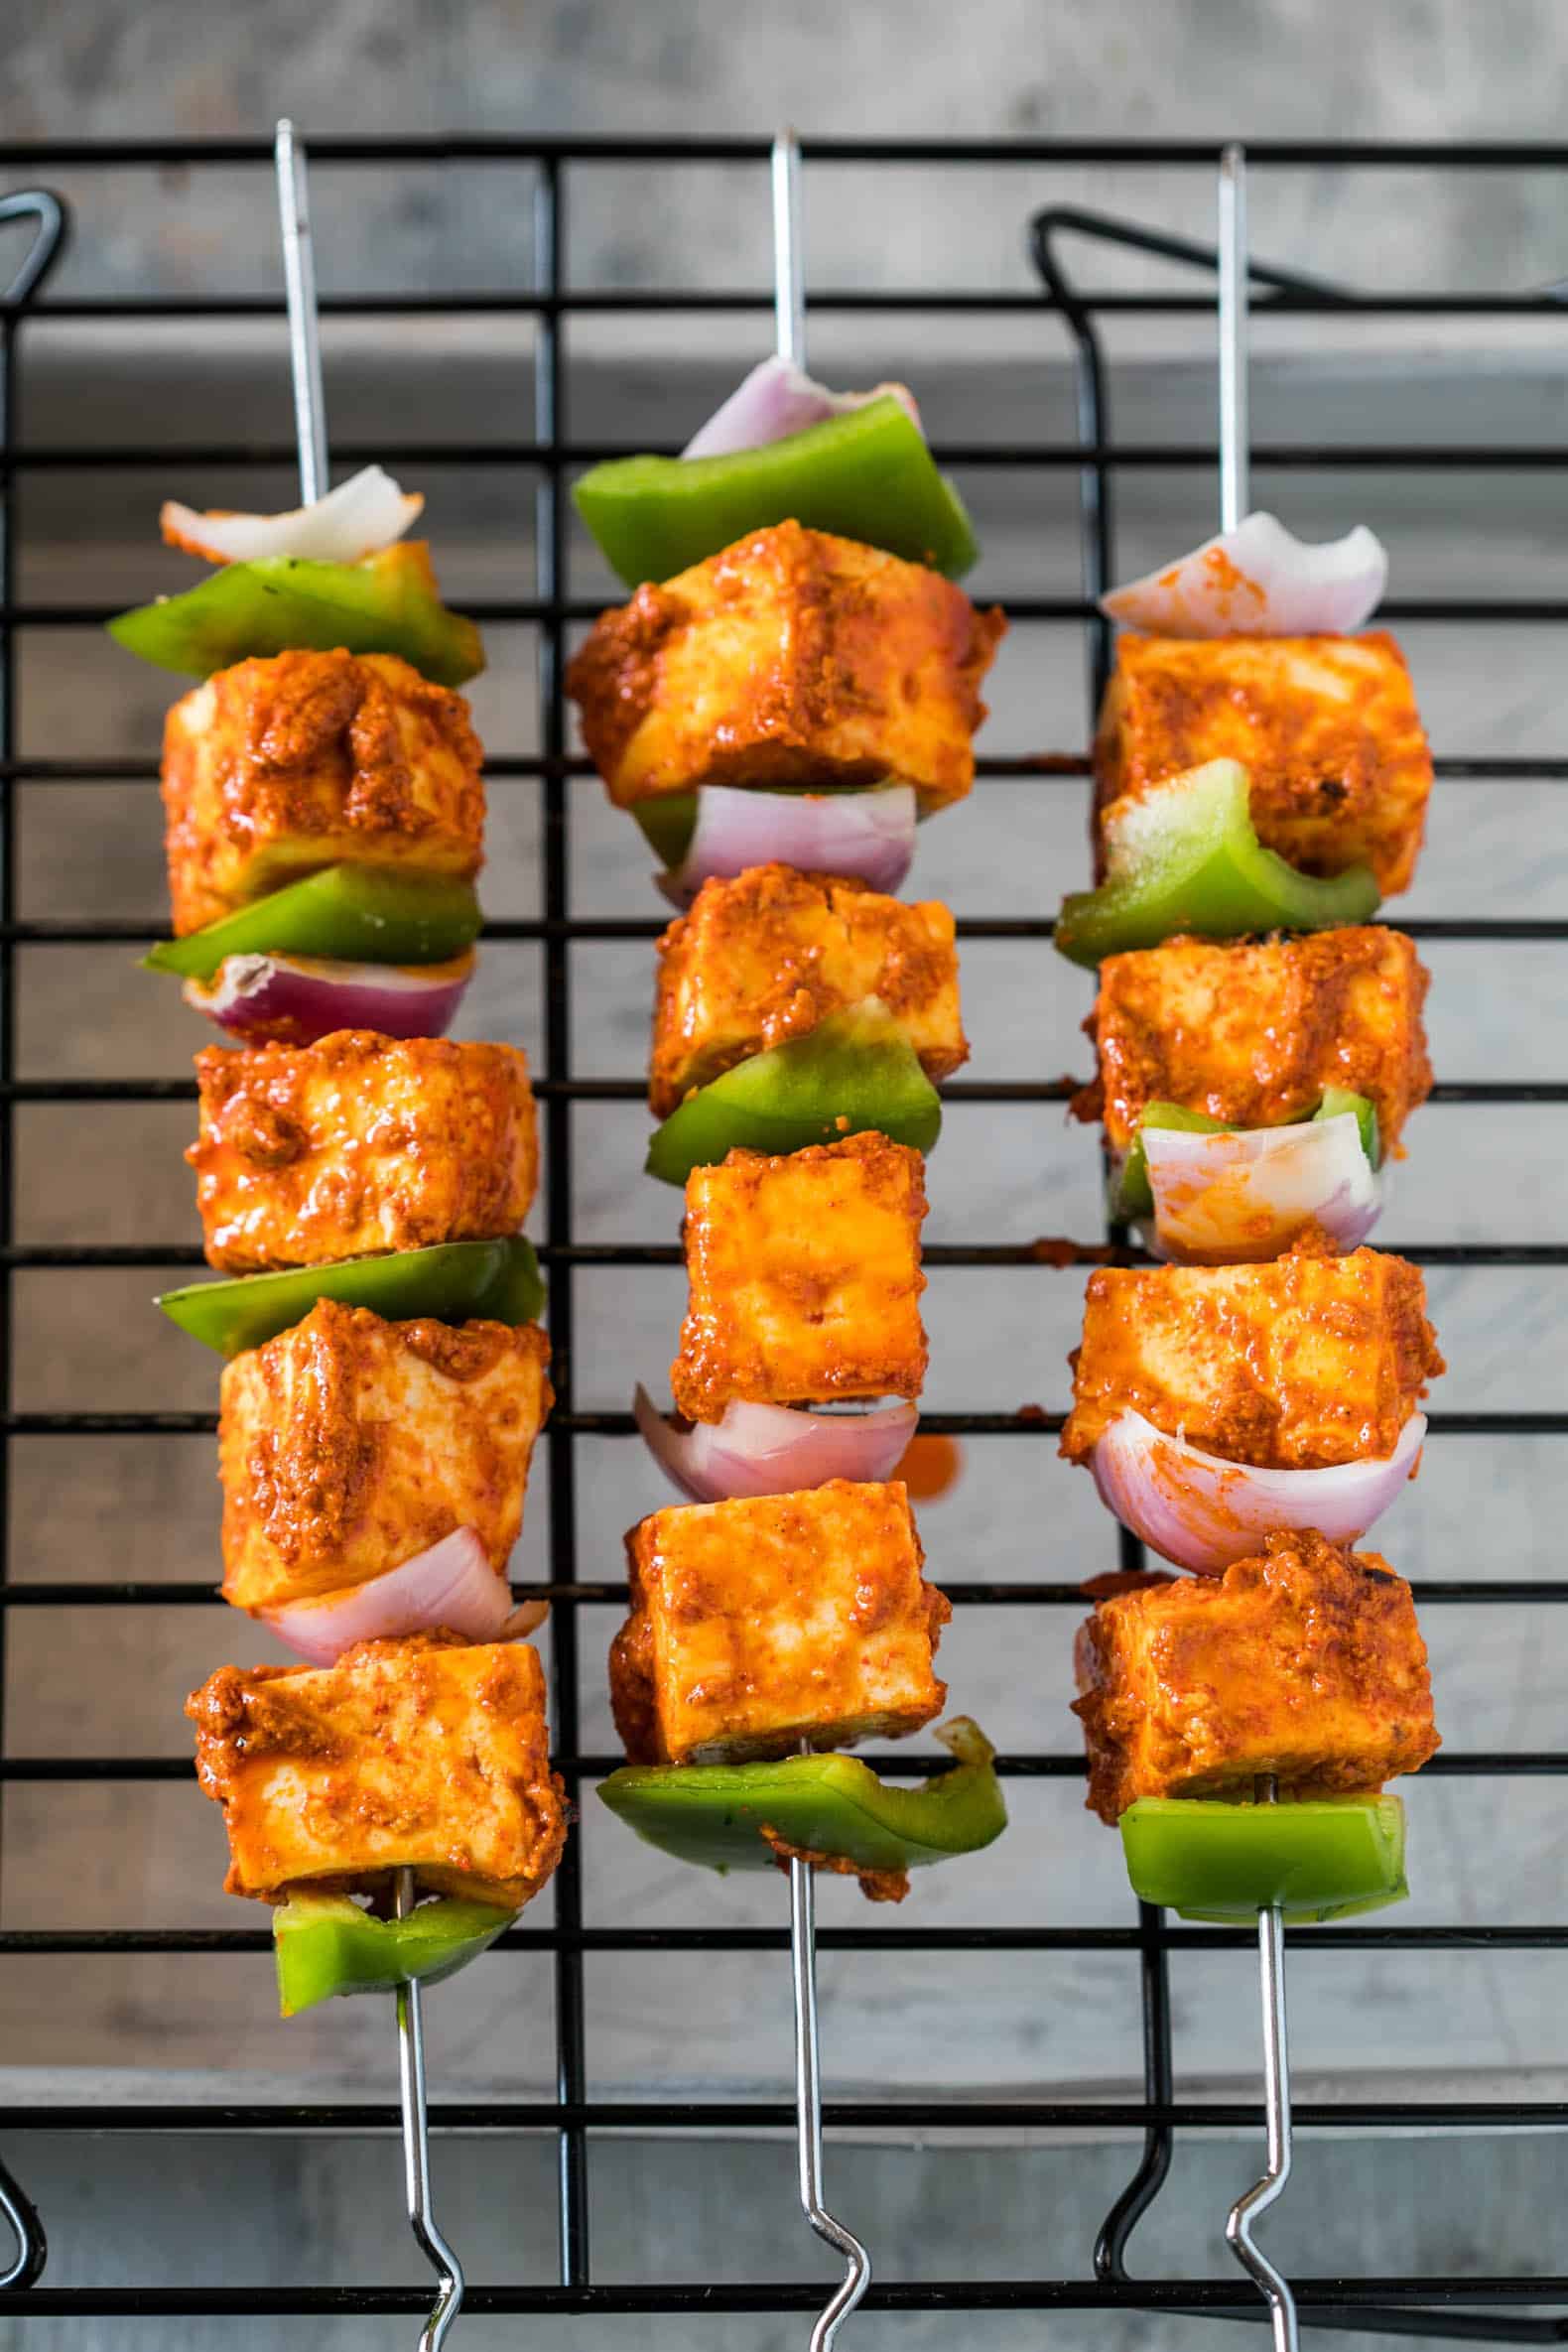 This is the best Tandoori Paneer Tikka in the oven you'll ever make at home! Same restaurant style taste, but roasted in the oven. 